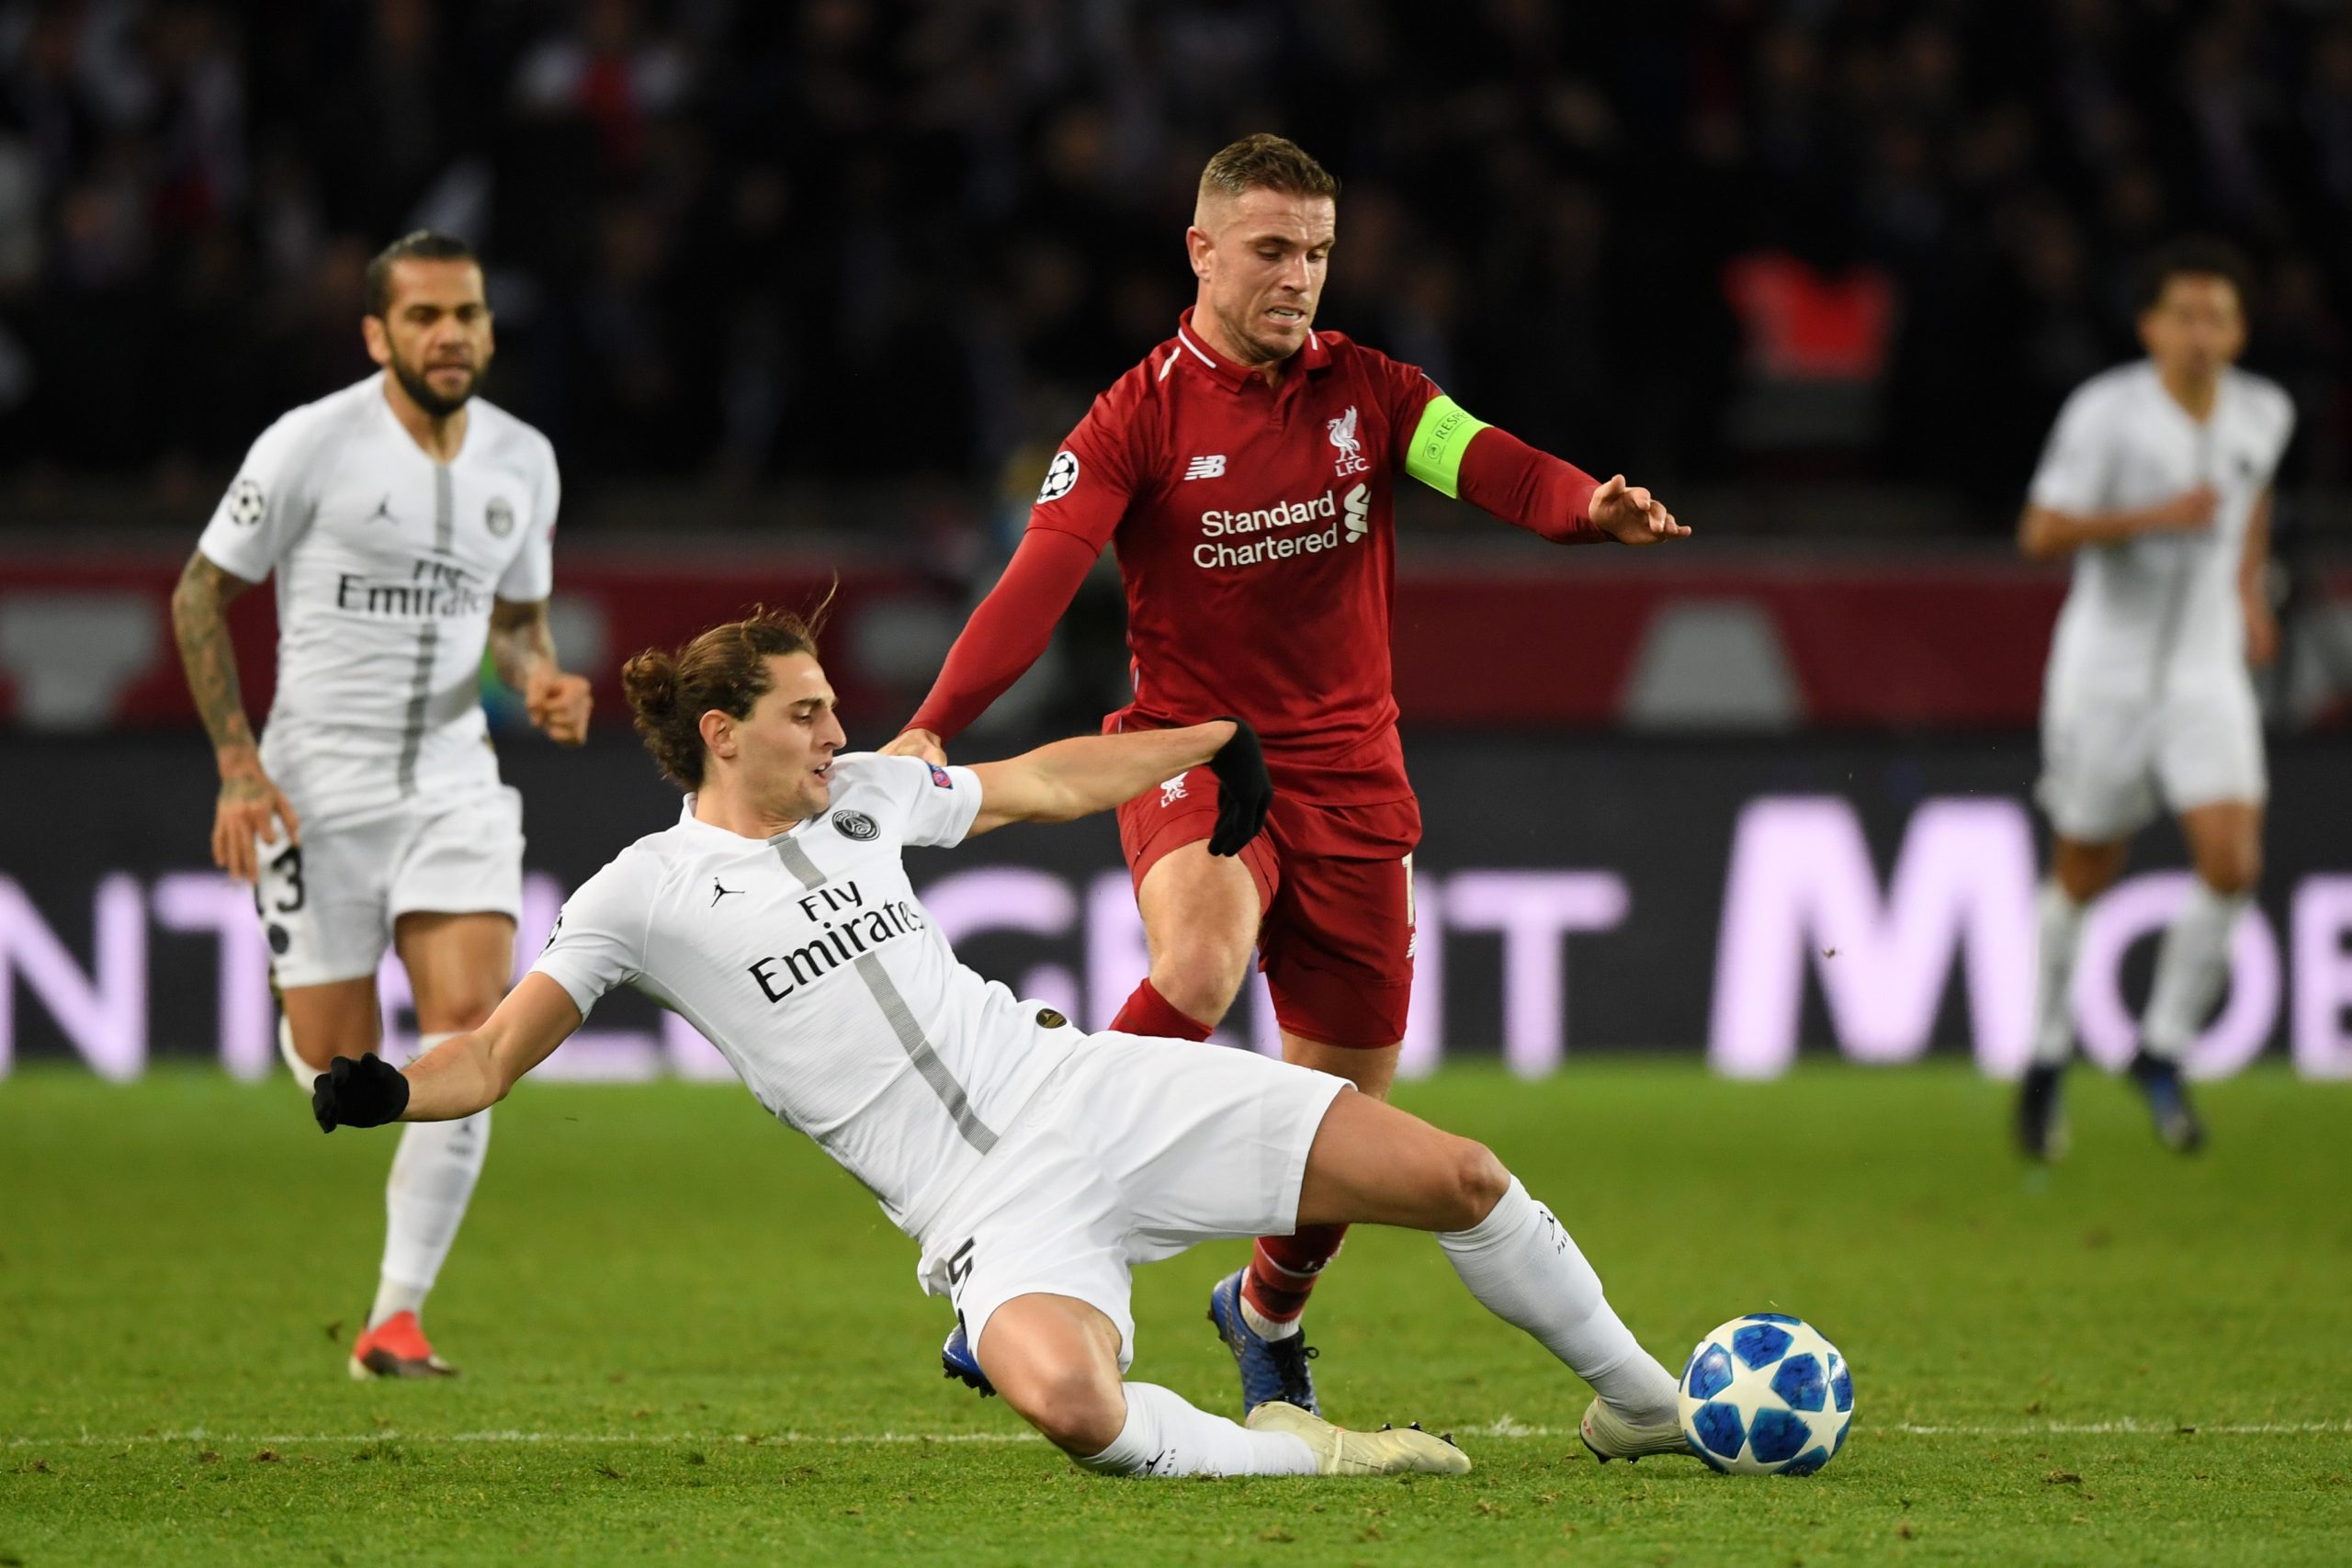 Adrien Rabiot of Paris Saint-Germain battles for possession with Jordan Henderson of Liverpool  during the UEFA Champions League Group C match between Paris Saint-Germain and Liverpool at Parc des Princes on November 28, 2018 in Paris, France.  (Photo by Shaun Botterill/Getty Images)